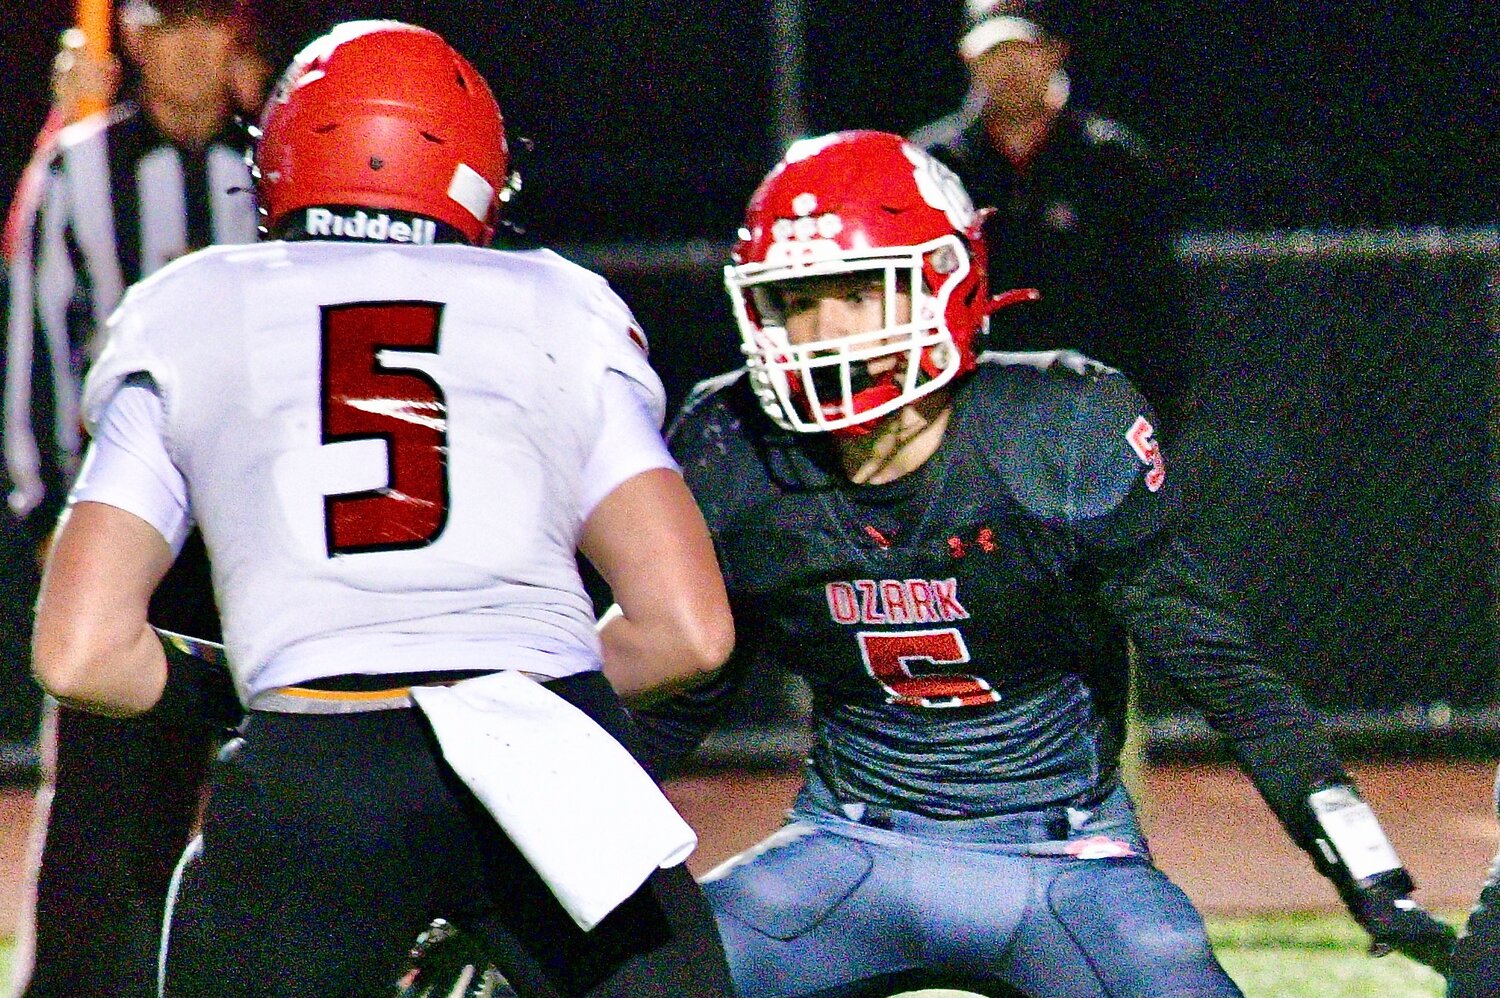 OZARK'S FRANKIE MUNOZ meets up with a Branson ball-carrier.